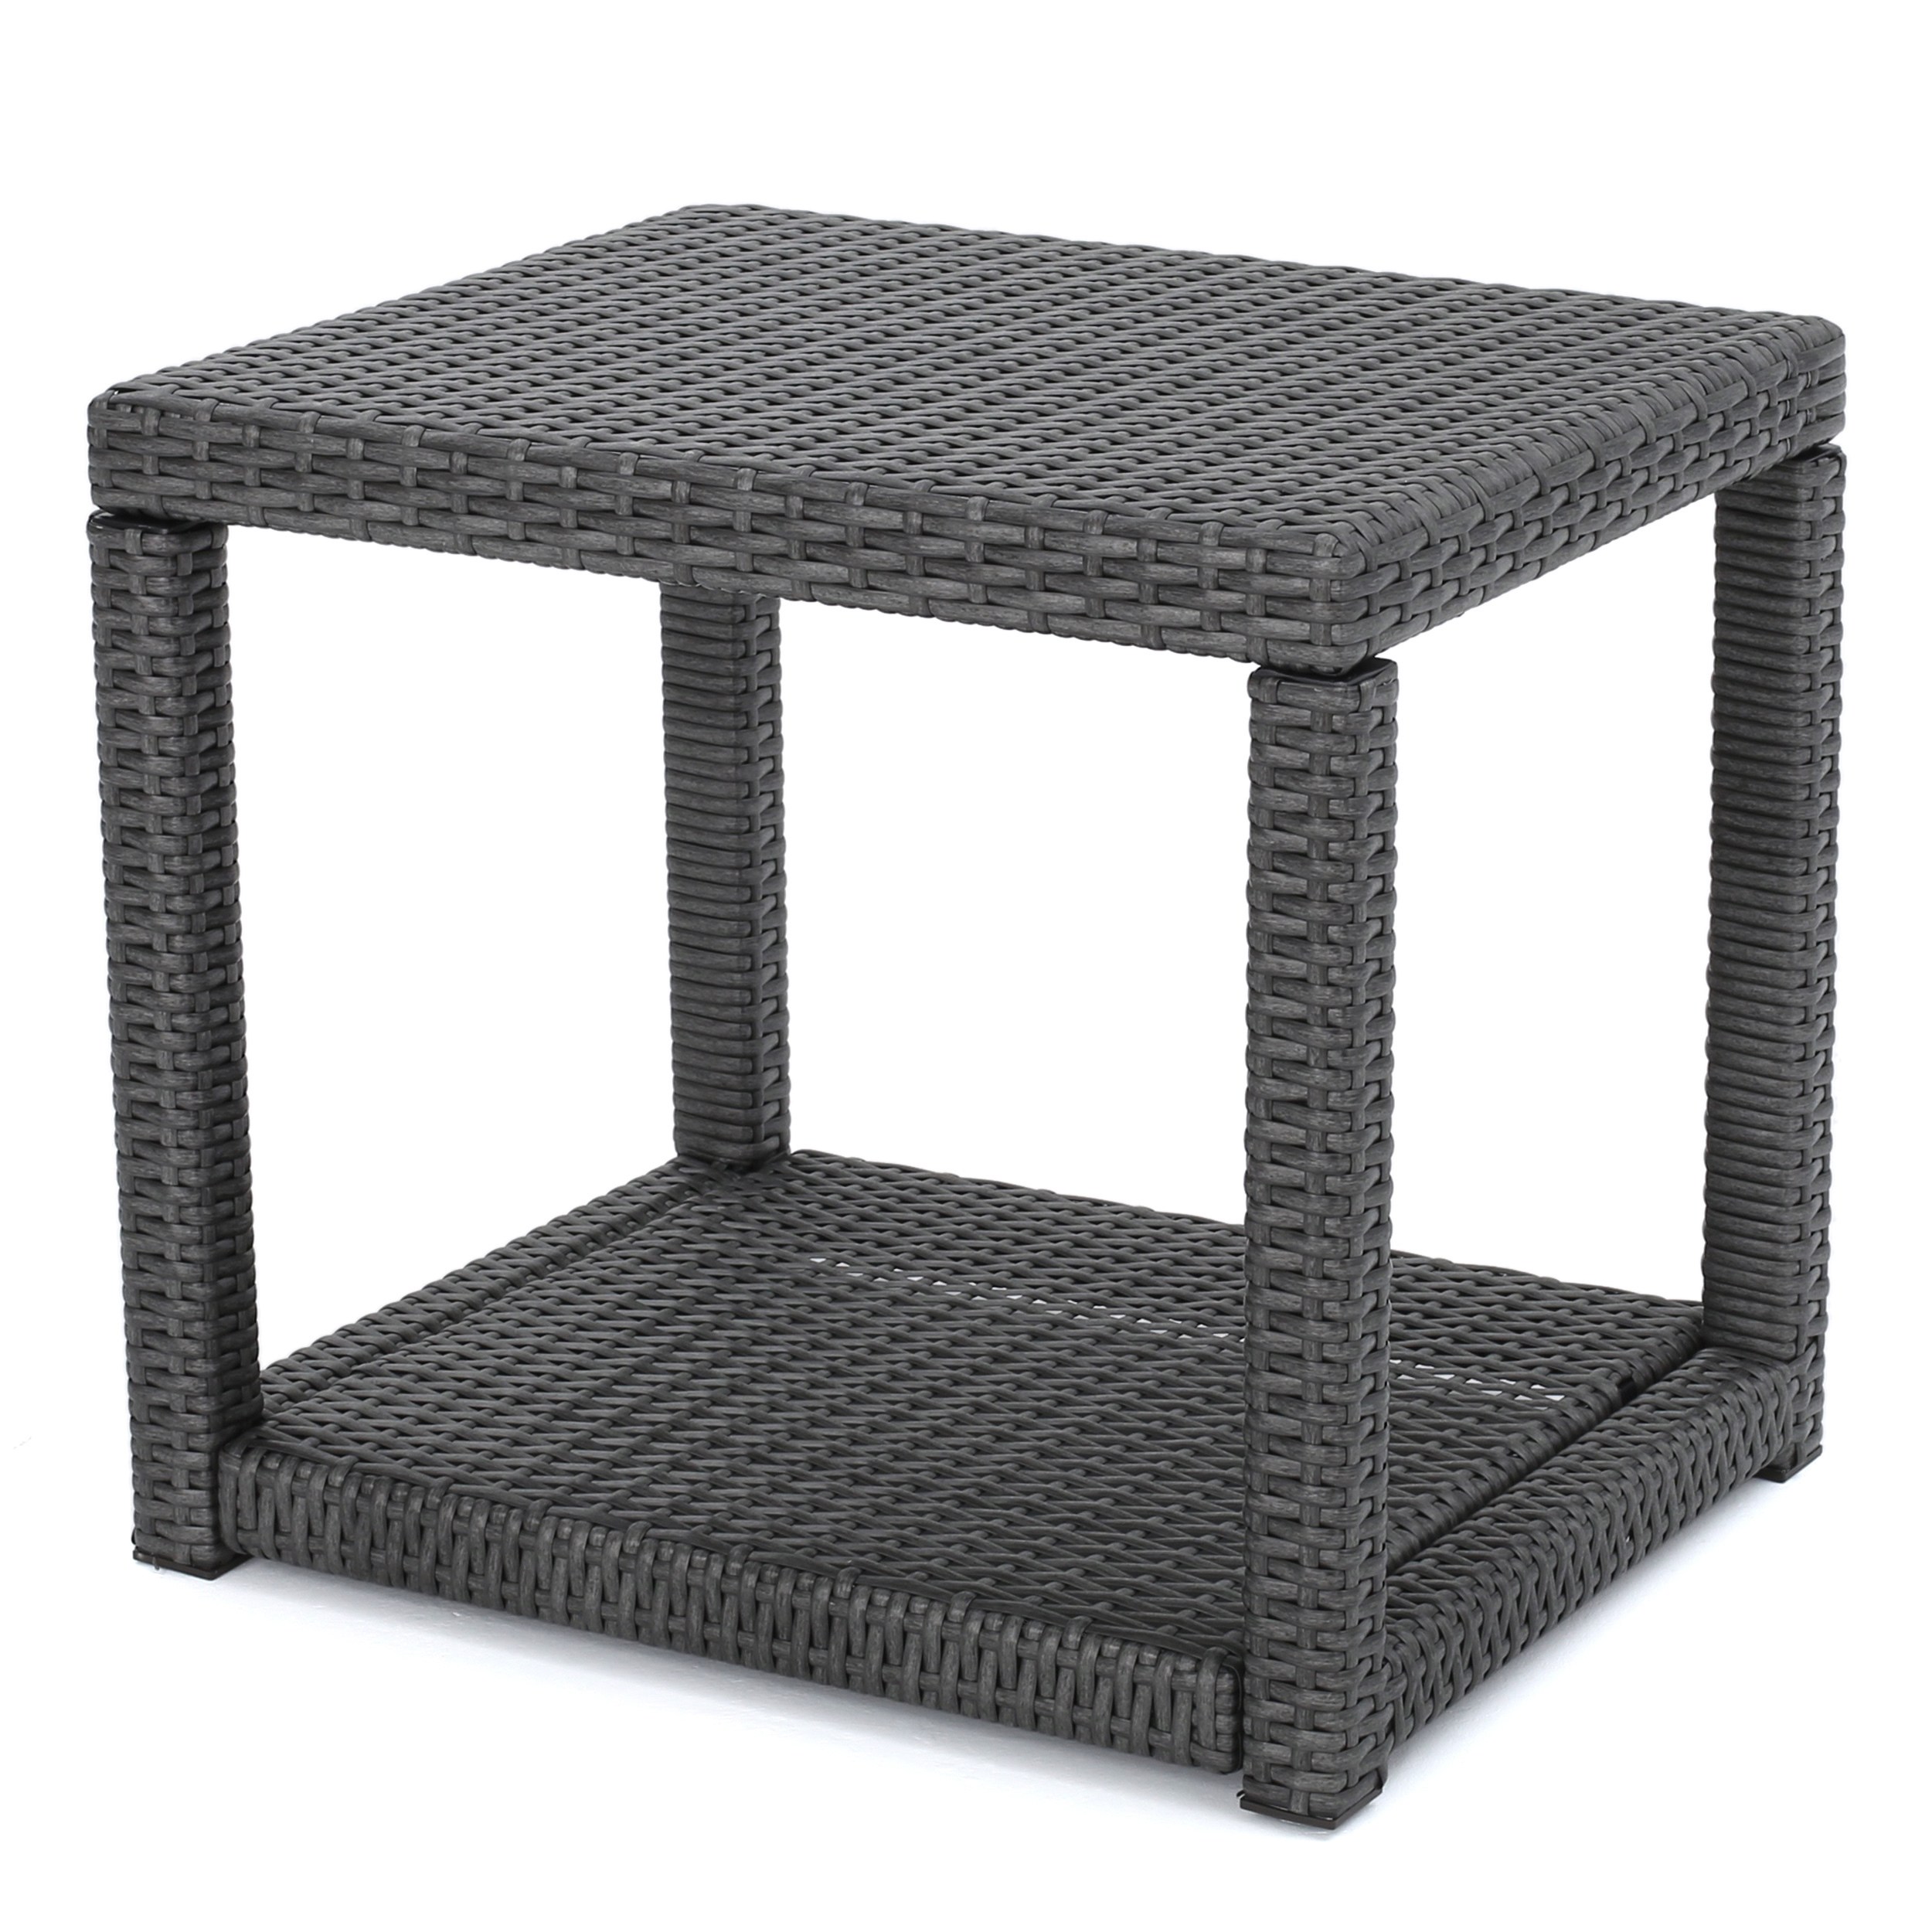 boracay outdoor square wicker accent table christopher knight home white free shipping today elm shabby chic side floating end patio umbrella modern coffee ideas small bunnings